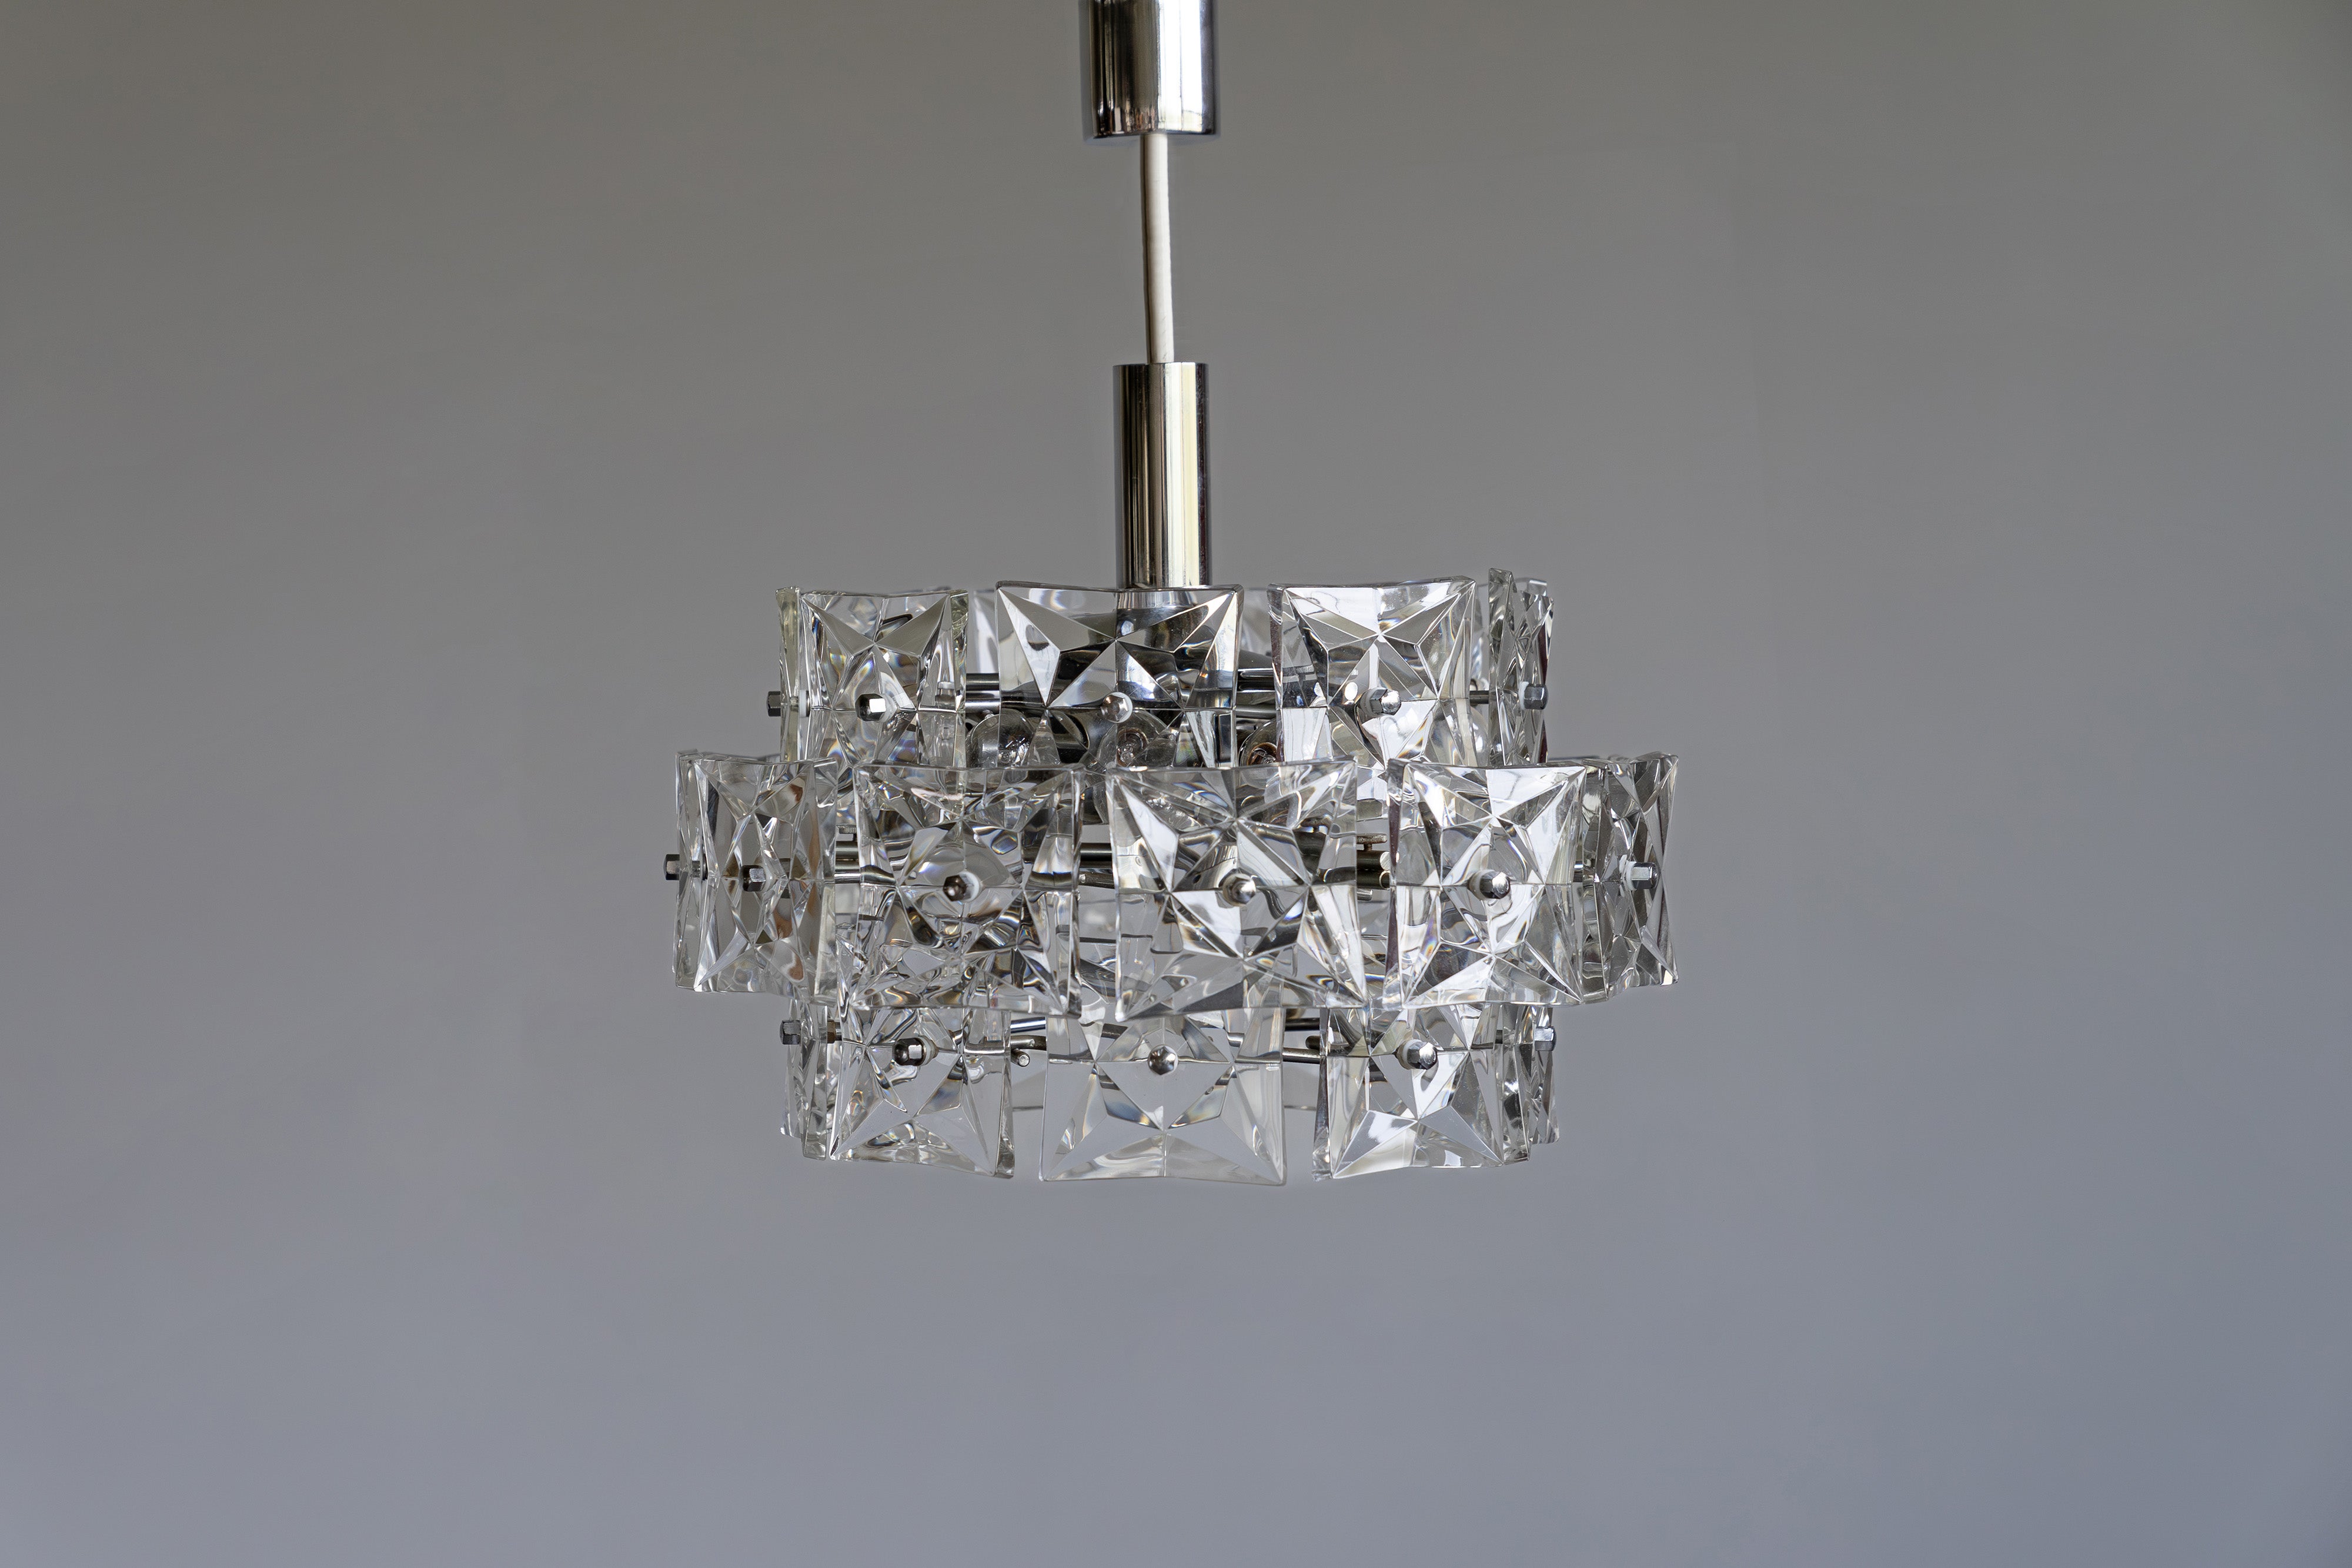 Chandelier by Kinkeldey made of chrome-plated steel and crystal glass. With its twelve E14 sockets, it provides sufficiently even light.